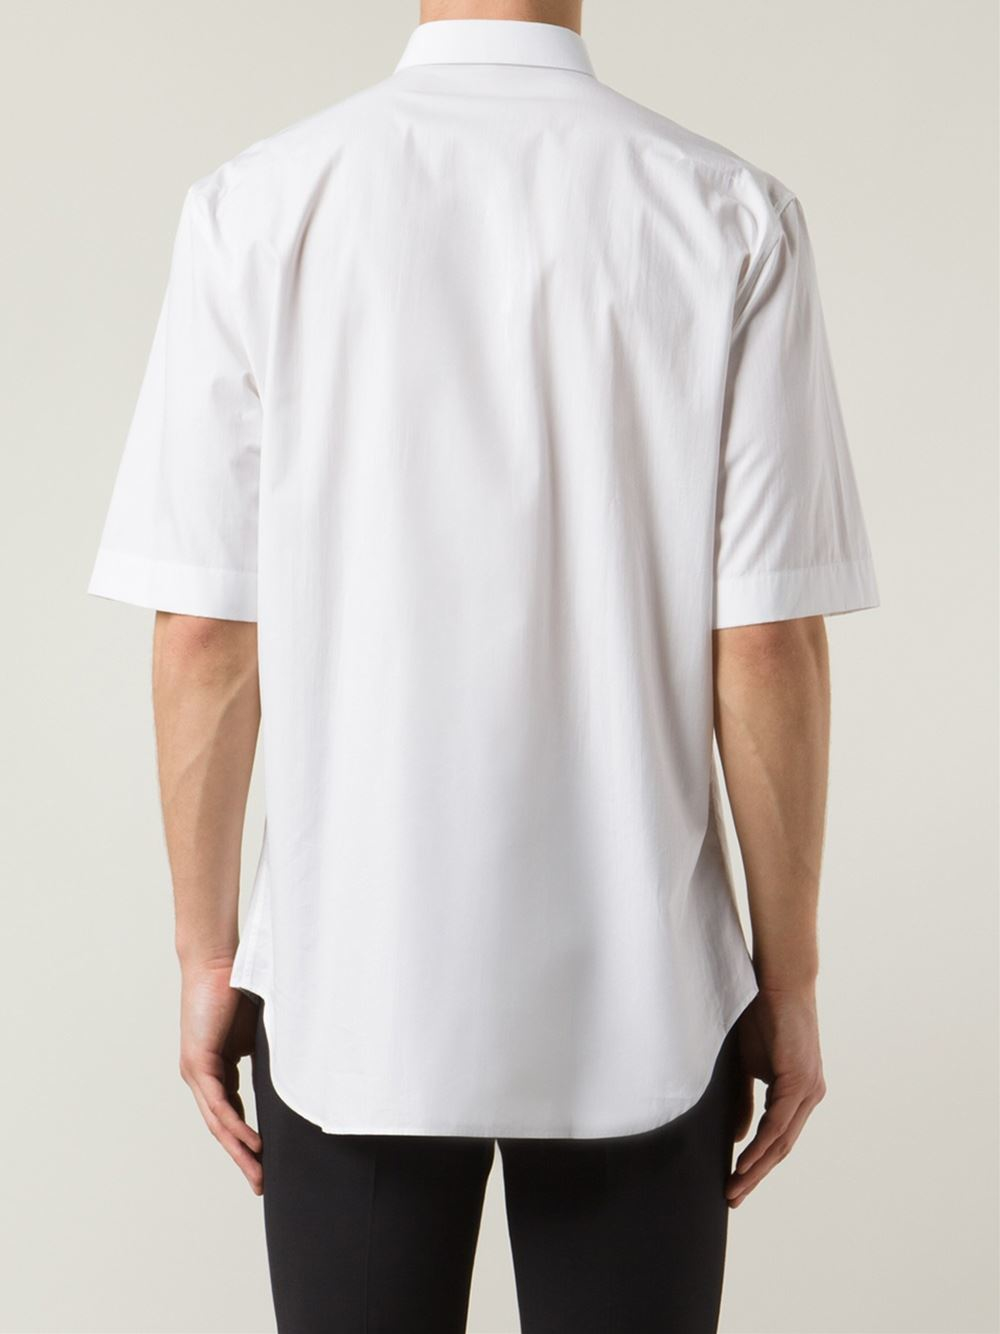 Dior homme Printed Shirt in White for Men | Lyst